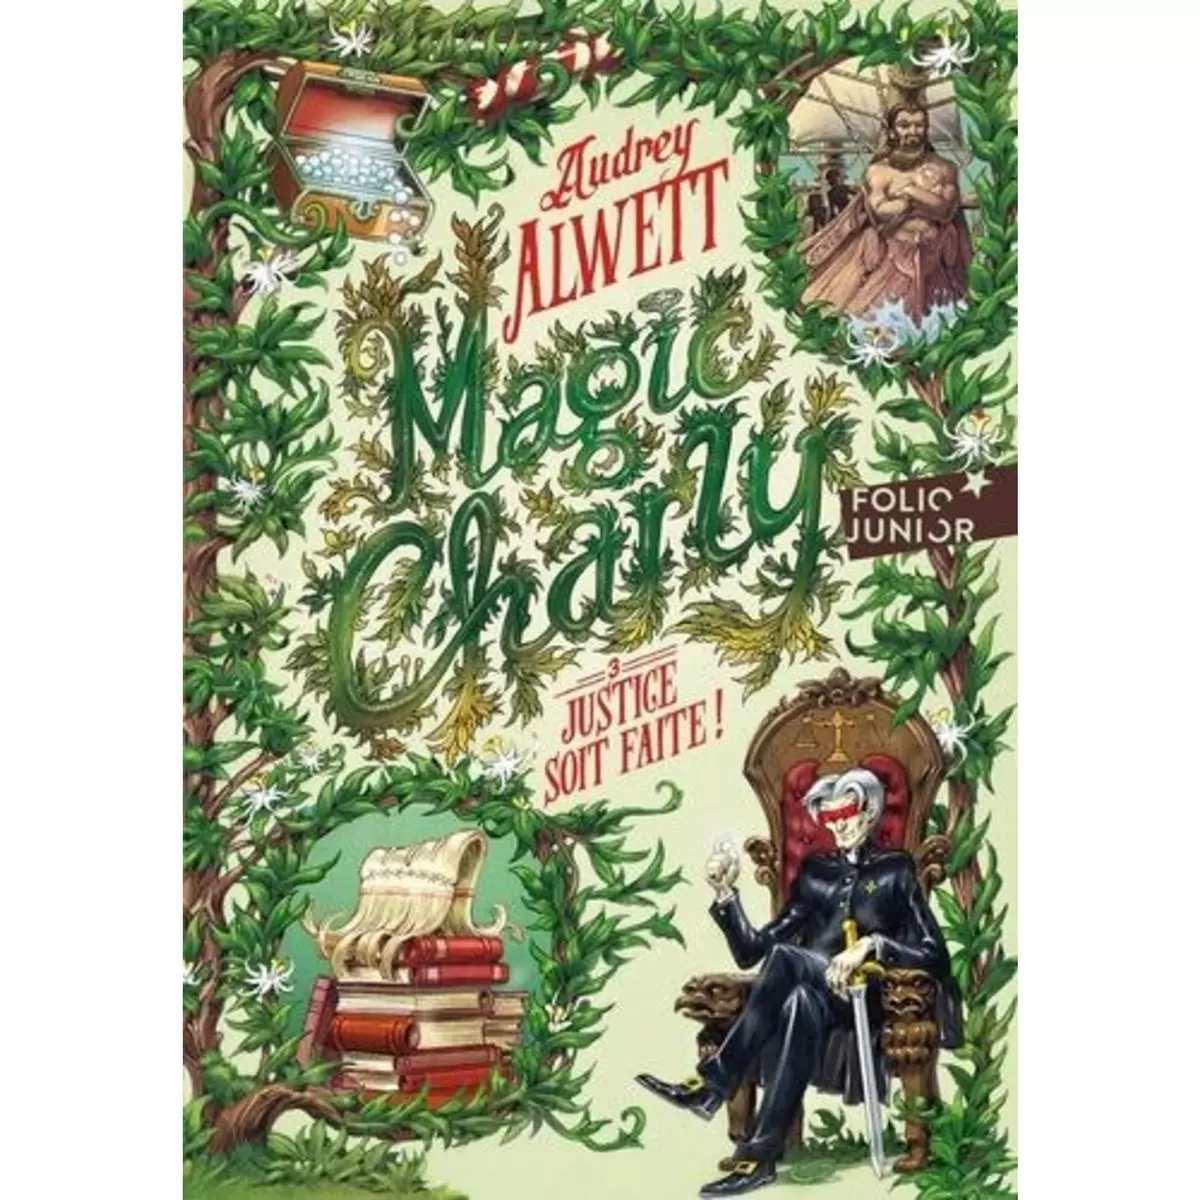  MAGIC CHARLY TOME 3 : JUSTICE SOIT FAITE !, Alwett Audrey